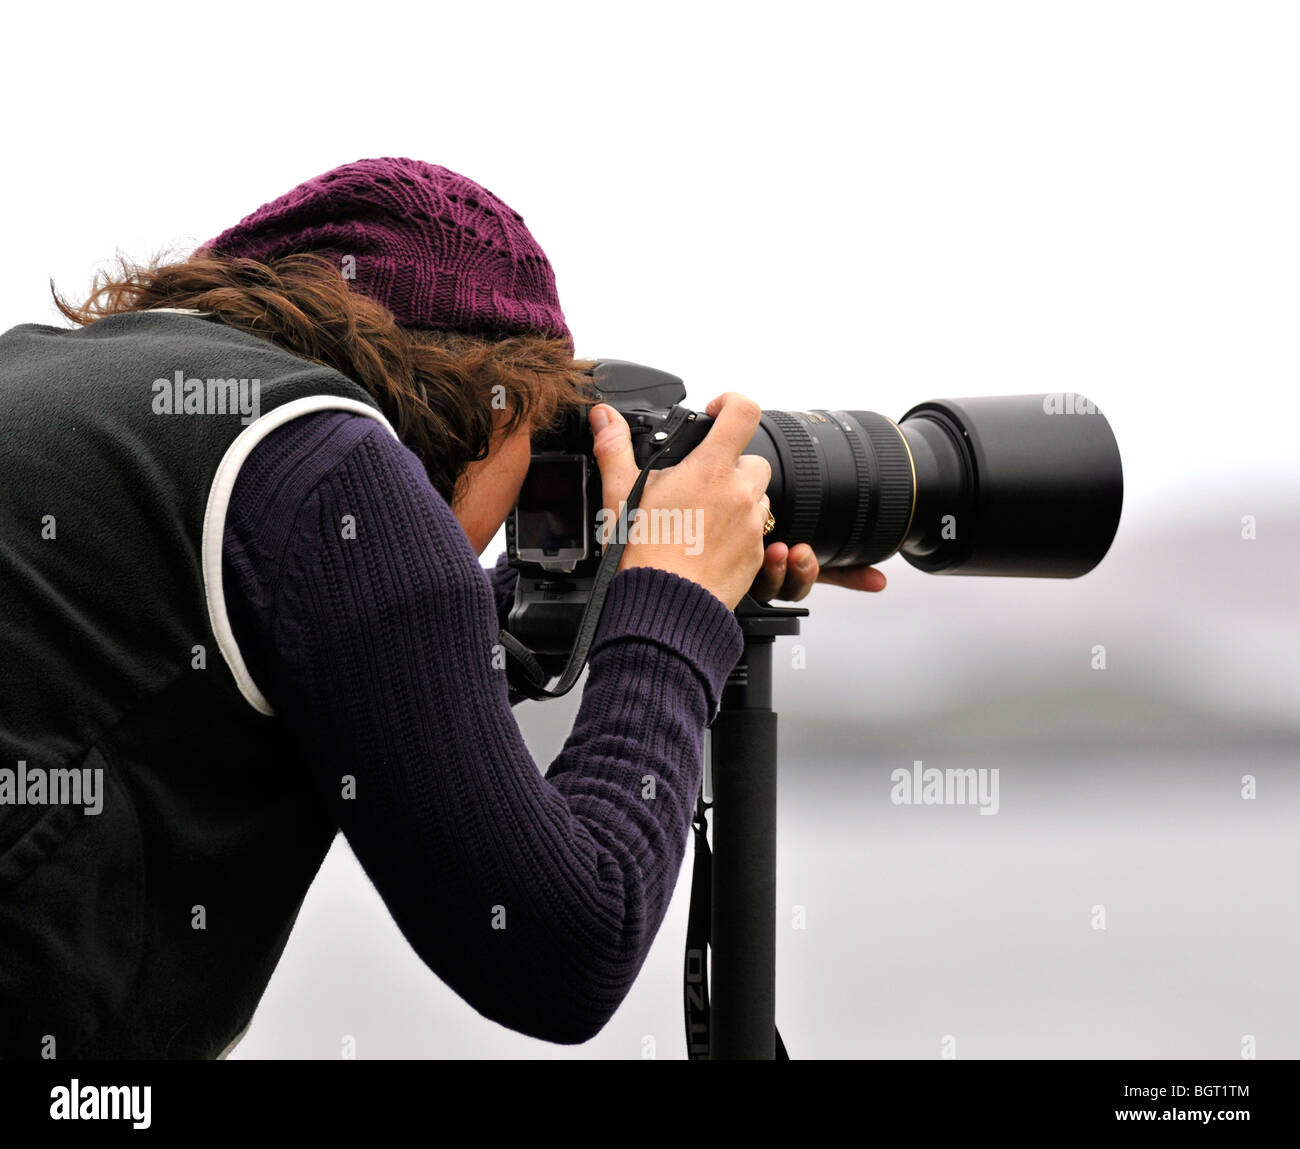 Female photographer taking photograph using high end digital camera with long telephoto lens and monopod. Stock Photo